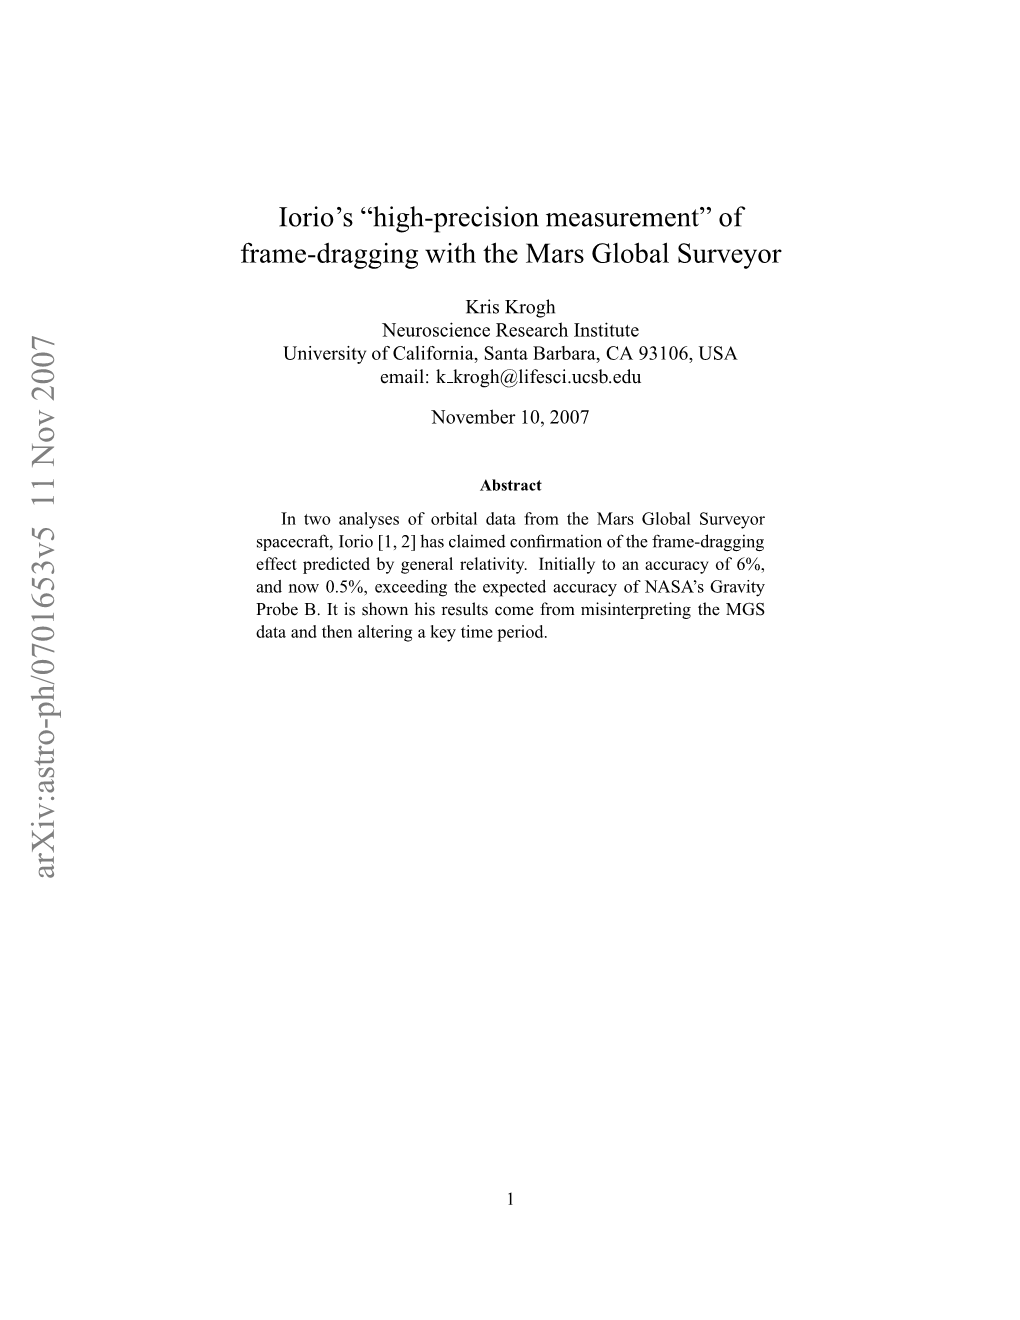 Iorio's" High-Precision Measurement" of Frame-Dragging with the Mars